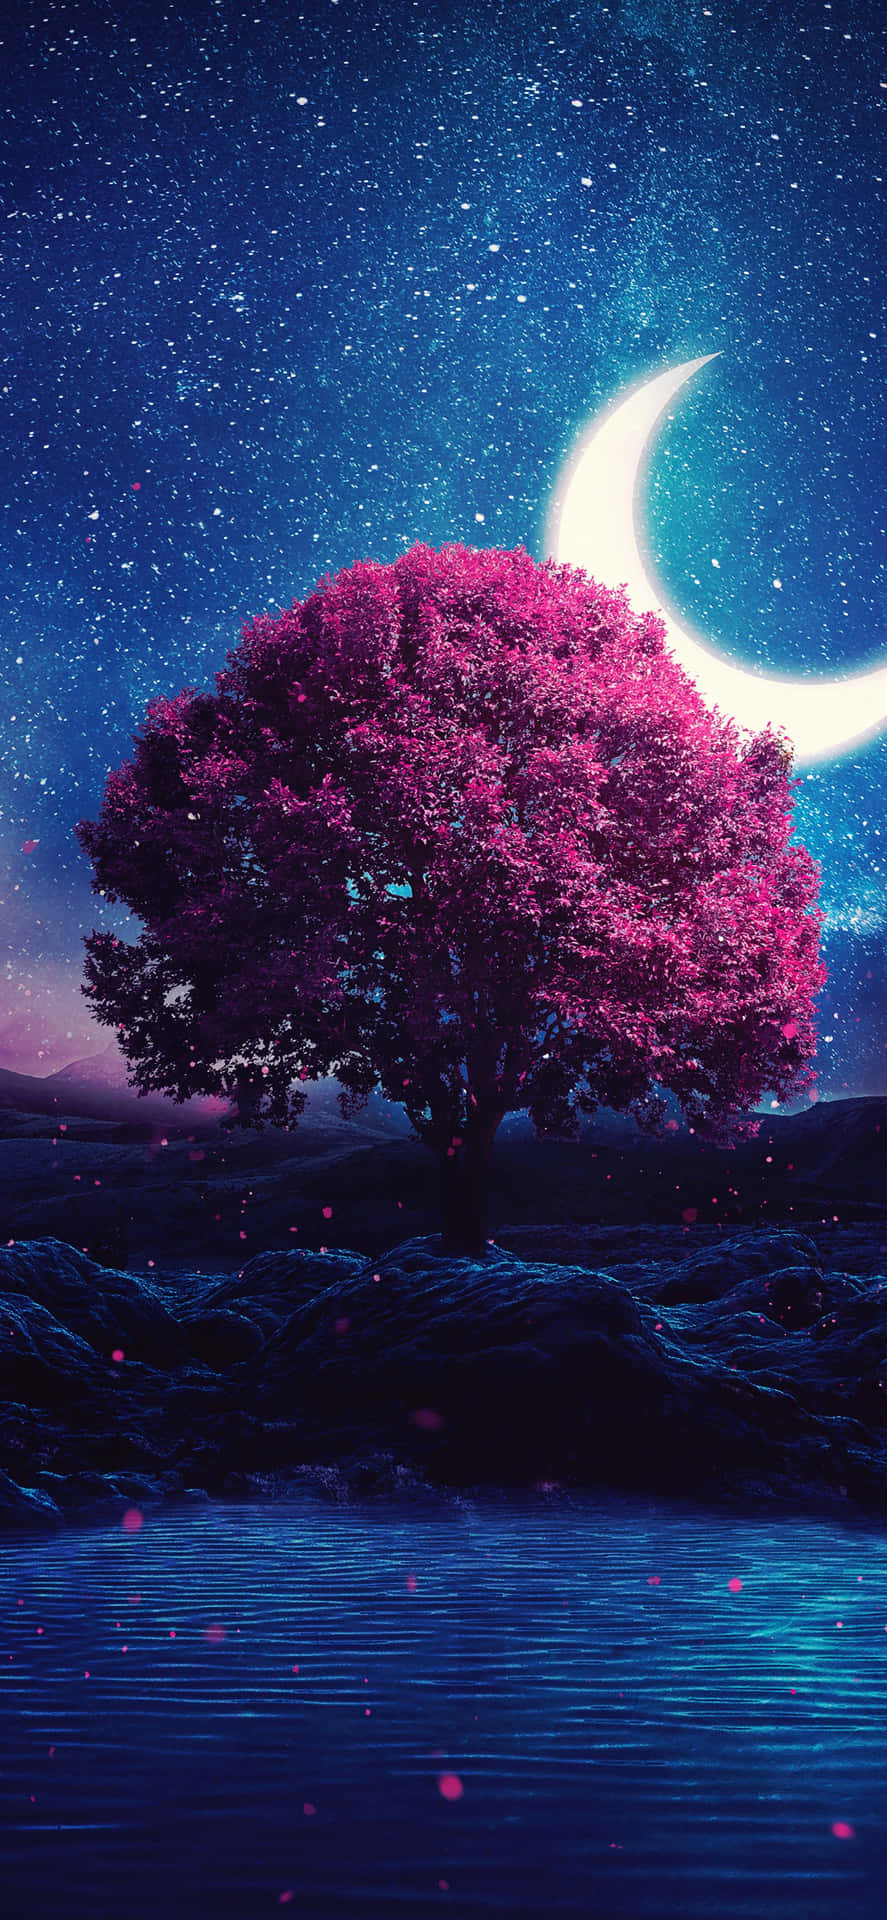 A Tree With A Crescent And Stars In The Sky Background